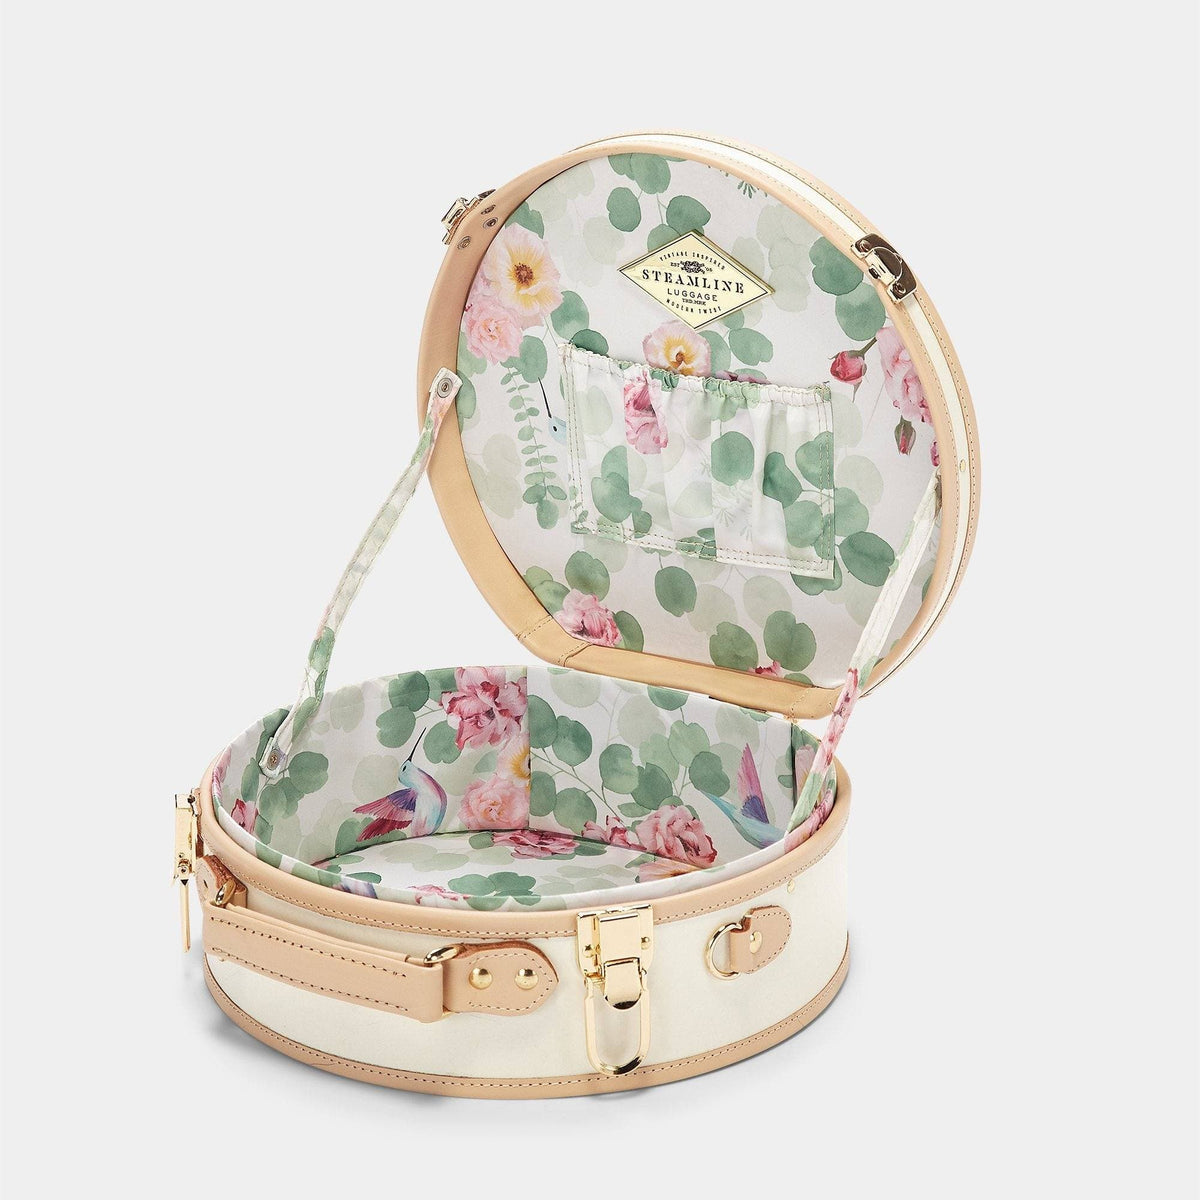 The Sweetheart - Hatbox Small Hatbox Small Steamline Luggage 